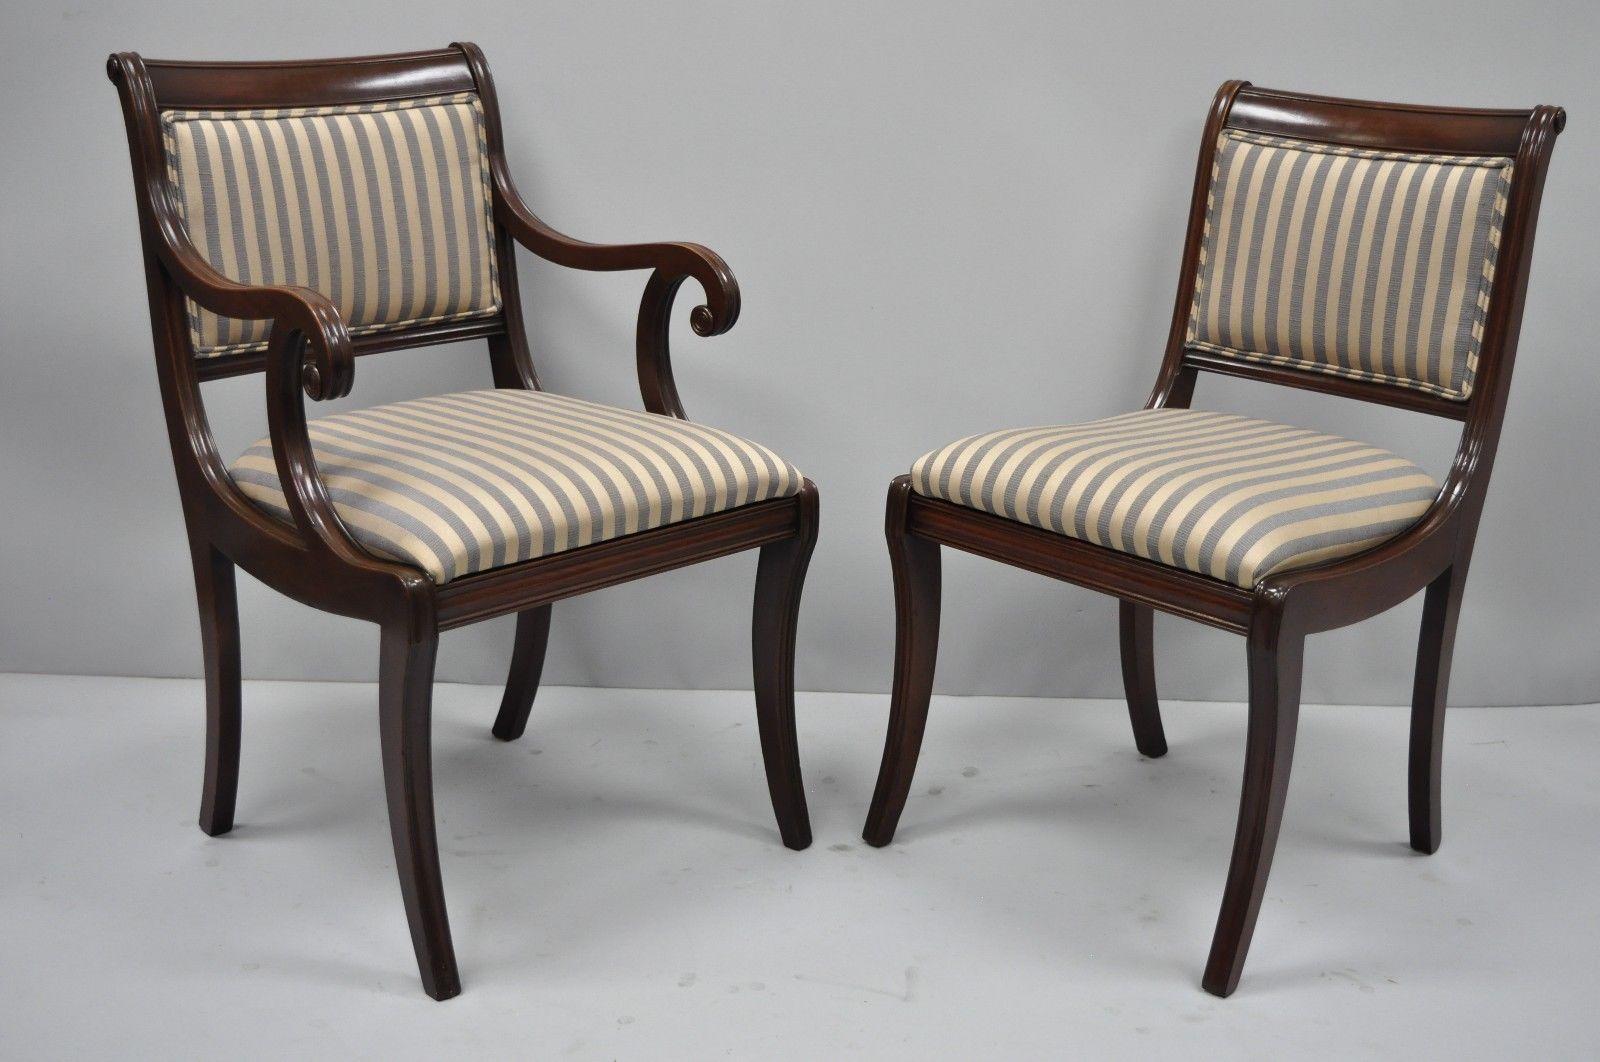 Set of six antique mahogany saber leg Regency style dining chairs. Item features four side chairs, two arm chairs, newer blue and tan or gold striped fabric, solid wood construction, shapely saber legs, and quality American craftsmanship, circa